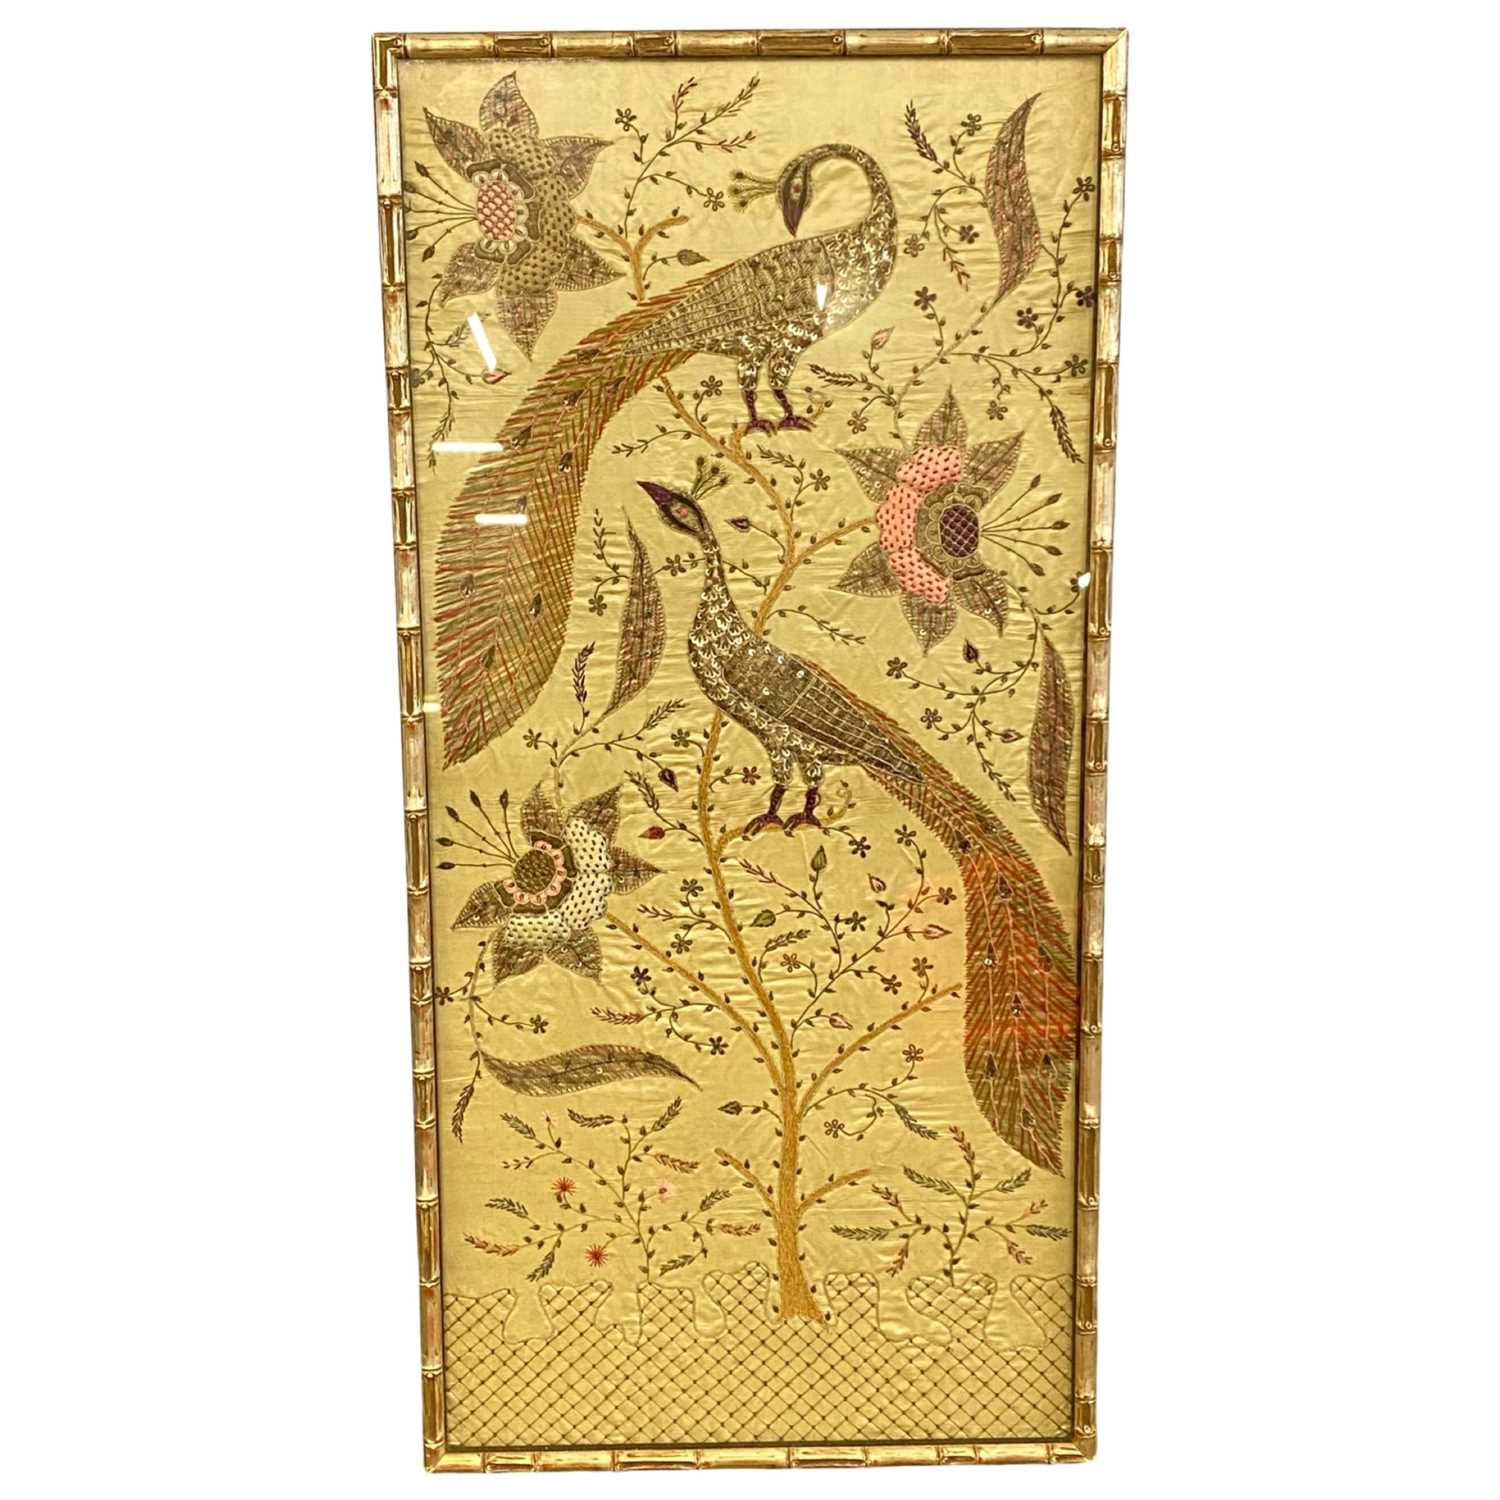 An Indian embroidered silk picture, on cream silk embroidered with peacocks, flowers and foliage, in